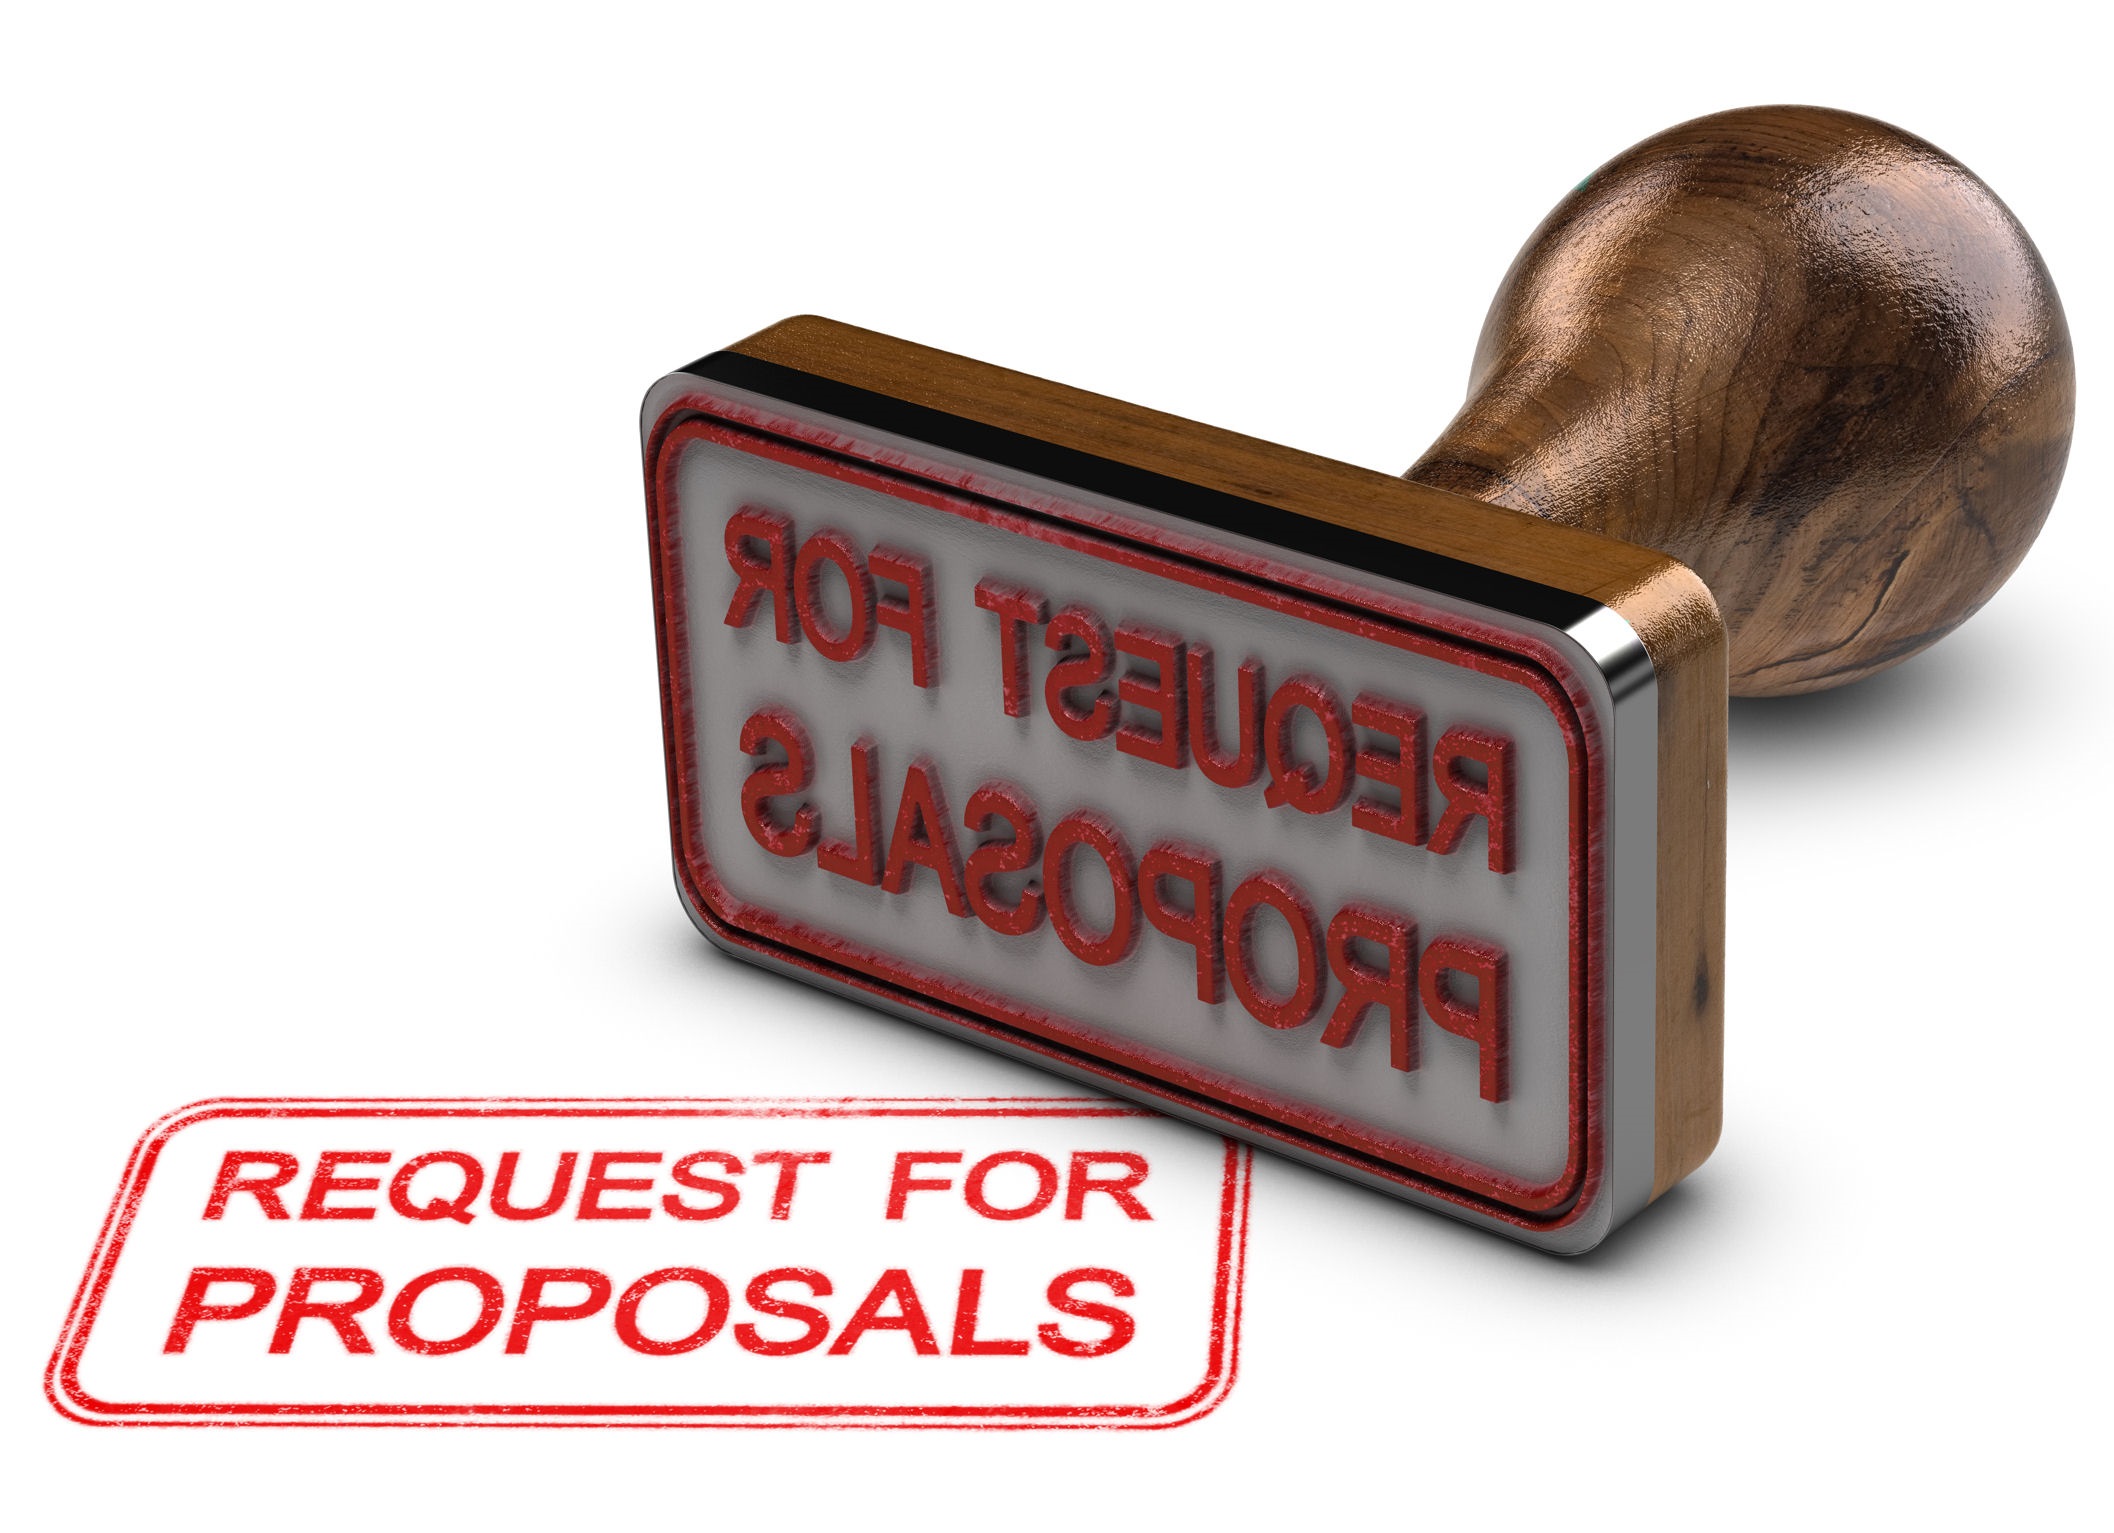 Request-for-Proposal-Stamp-Image.jpg